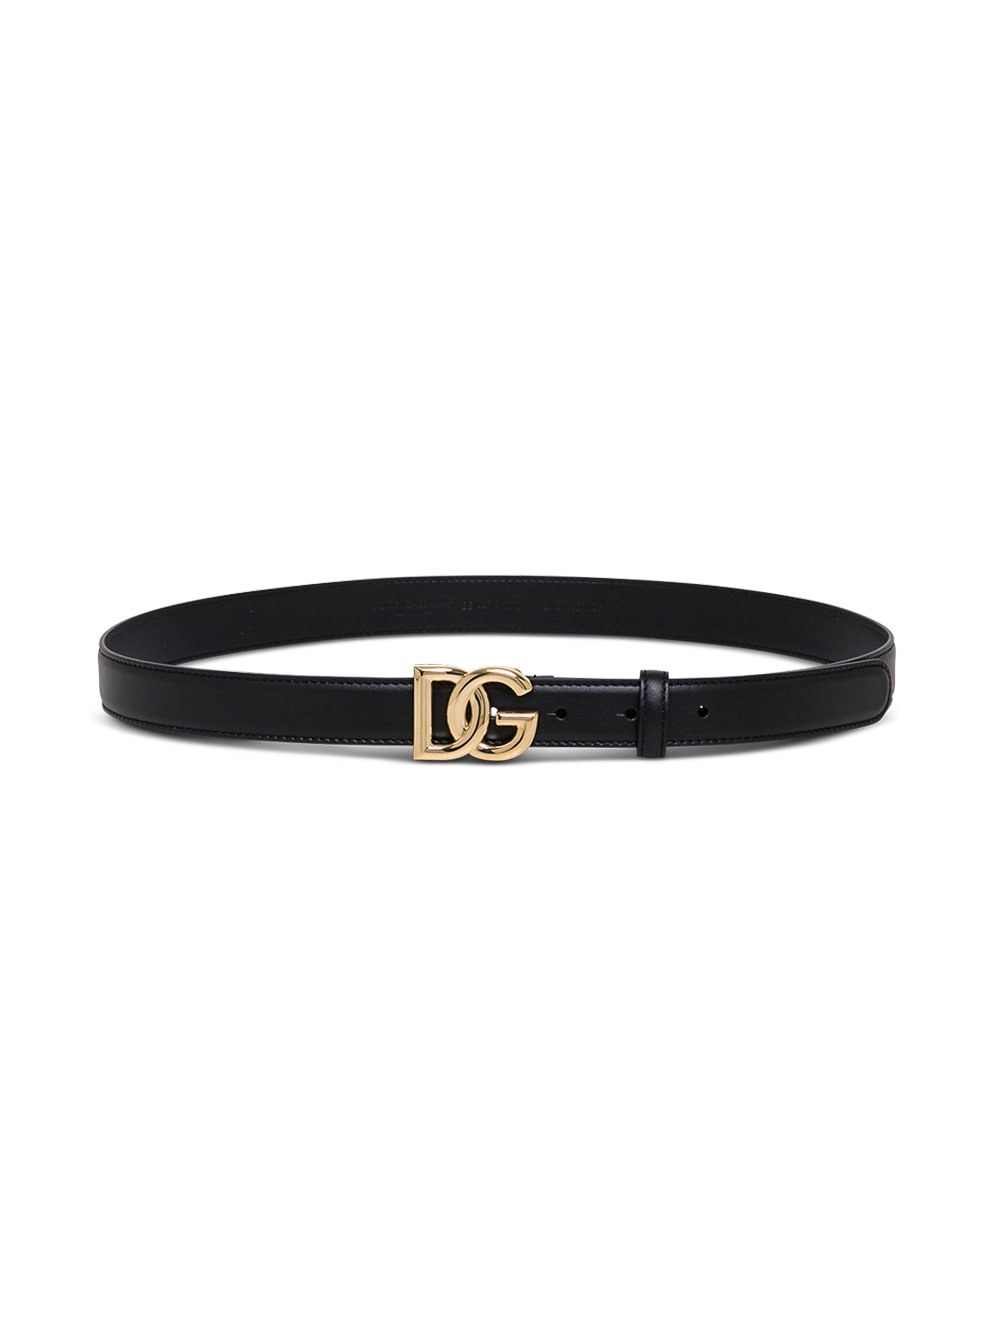 Dolce & Gabbana Womans Black Leather Belt With Logo Buckle